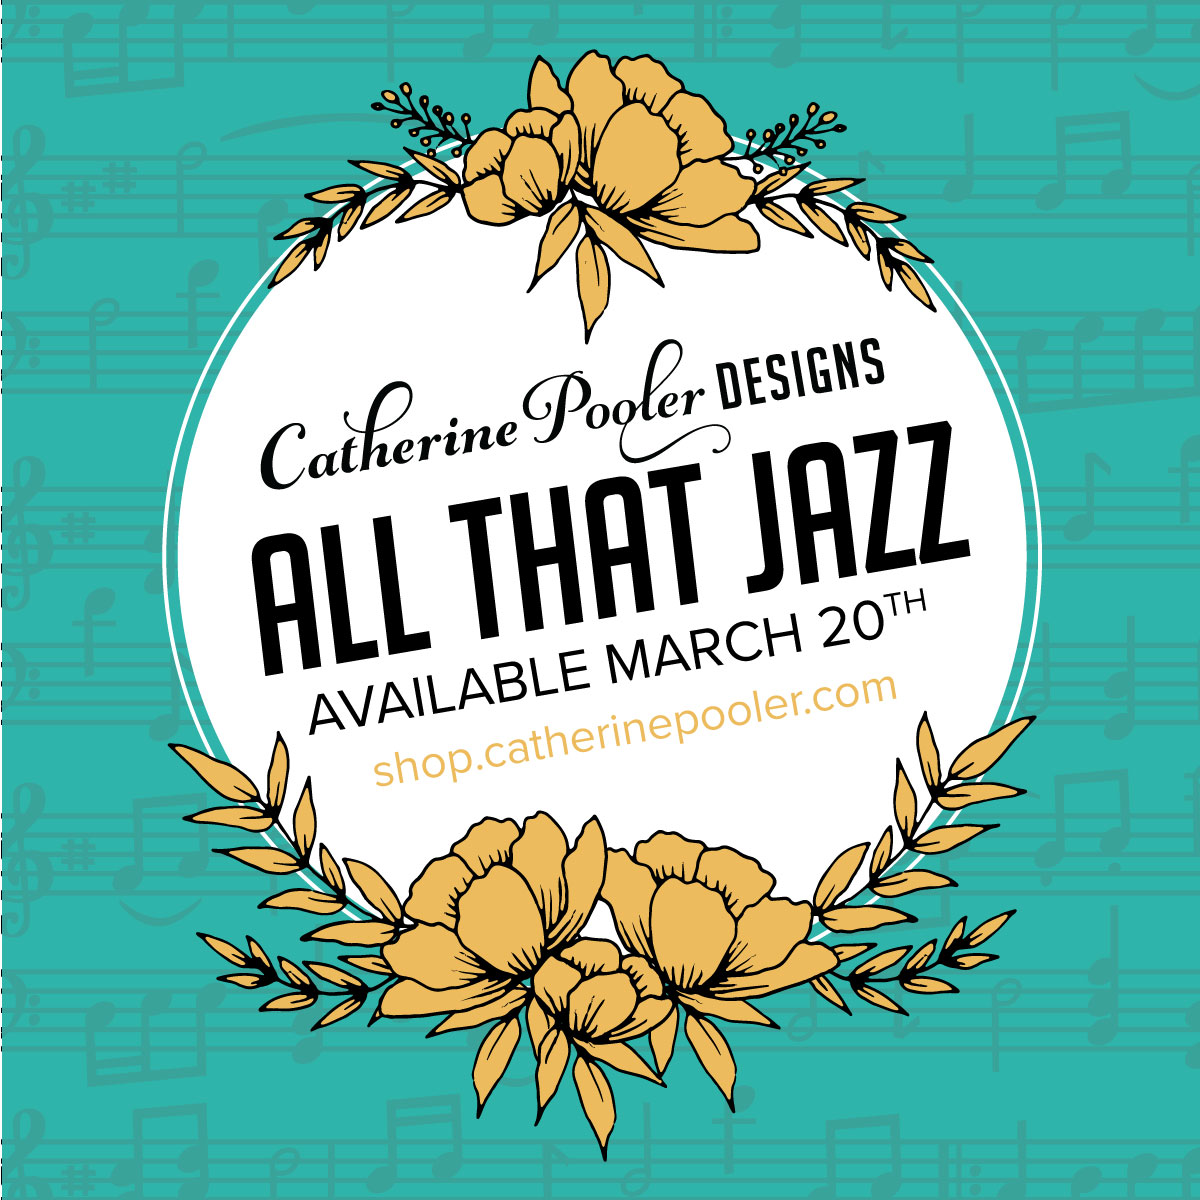 All That Jazz - Catherine Pooler Designs